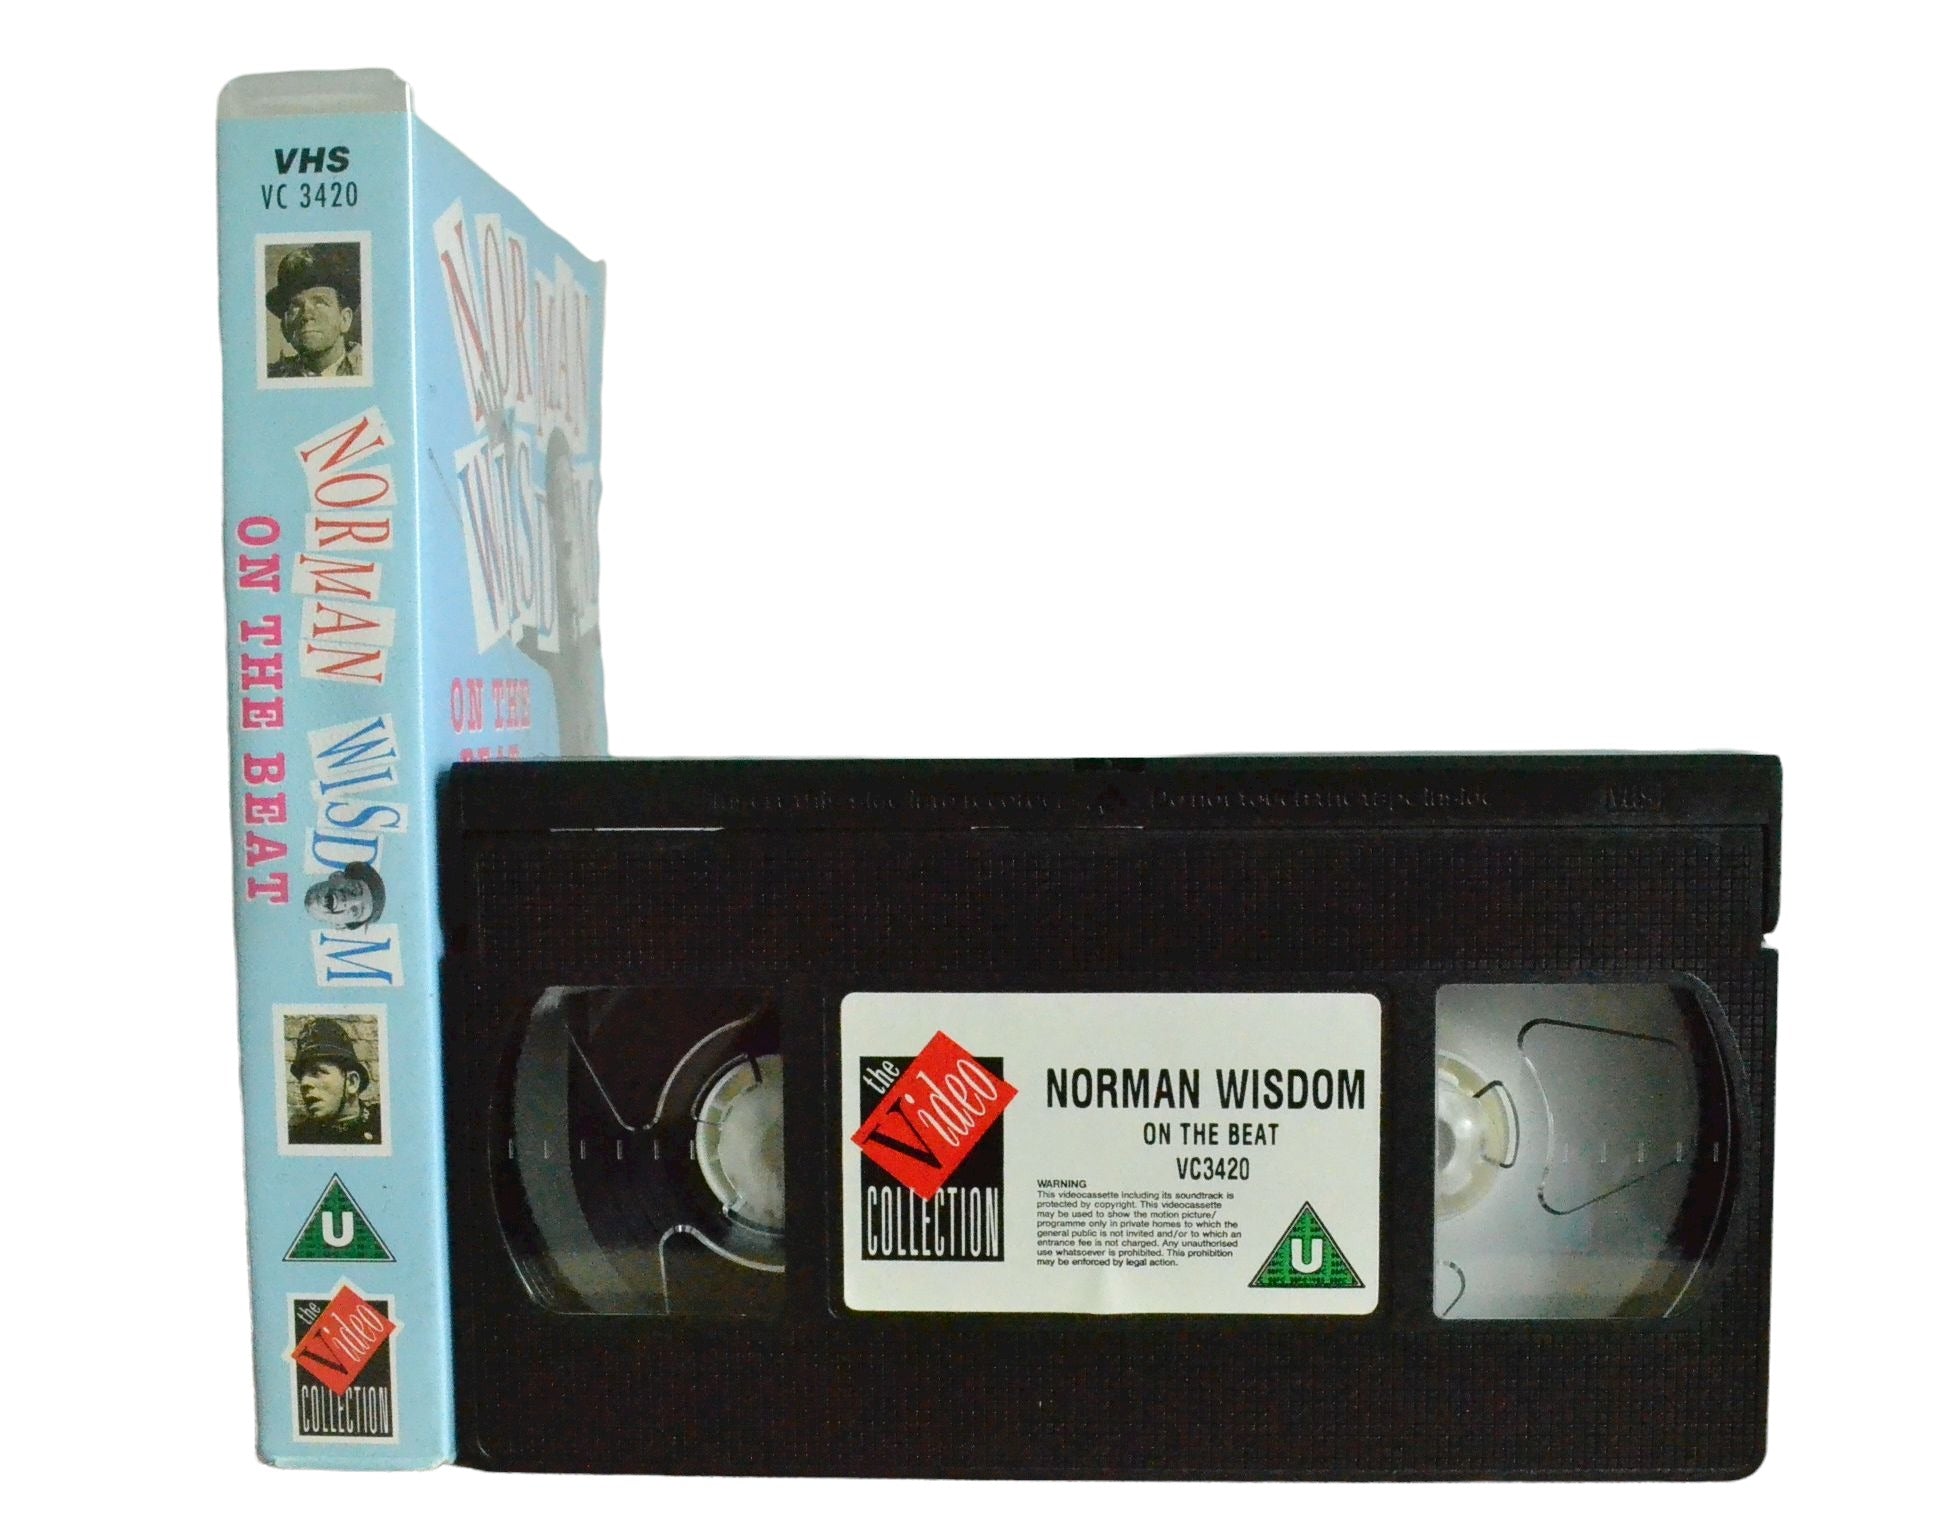 Norman Wisdom On The Beat - Norman Wisdom - The Video Collection - Comedy - Pal VHS-